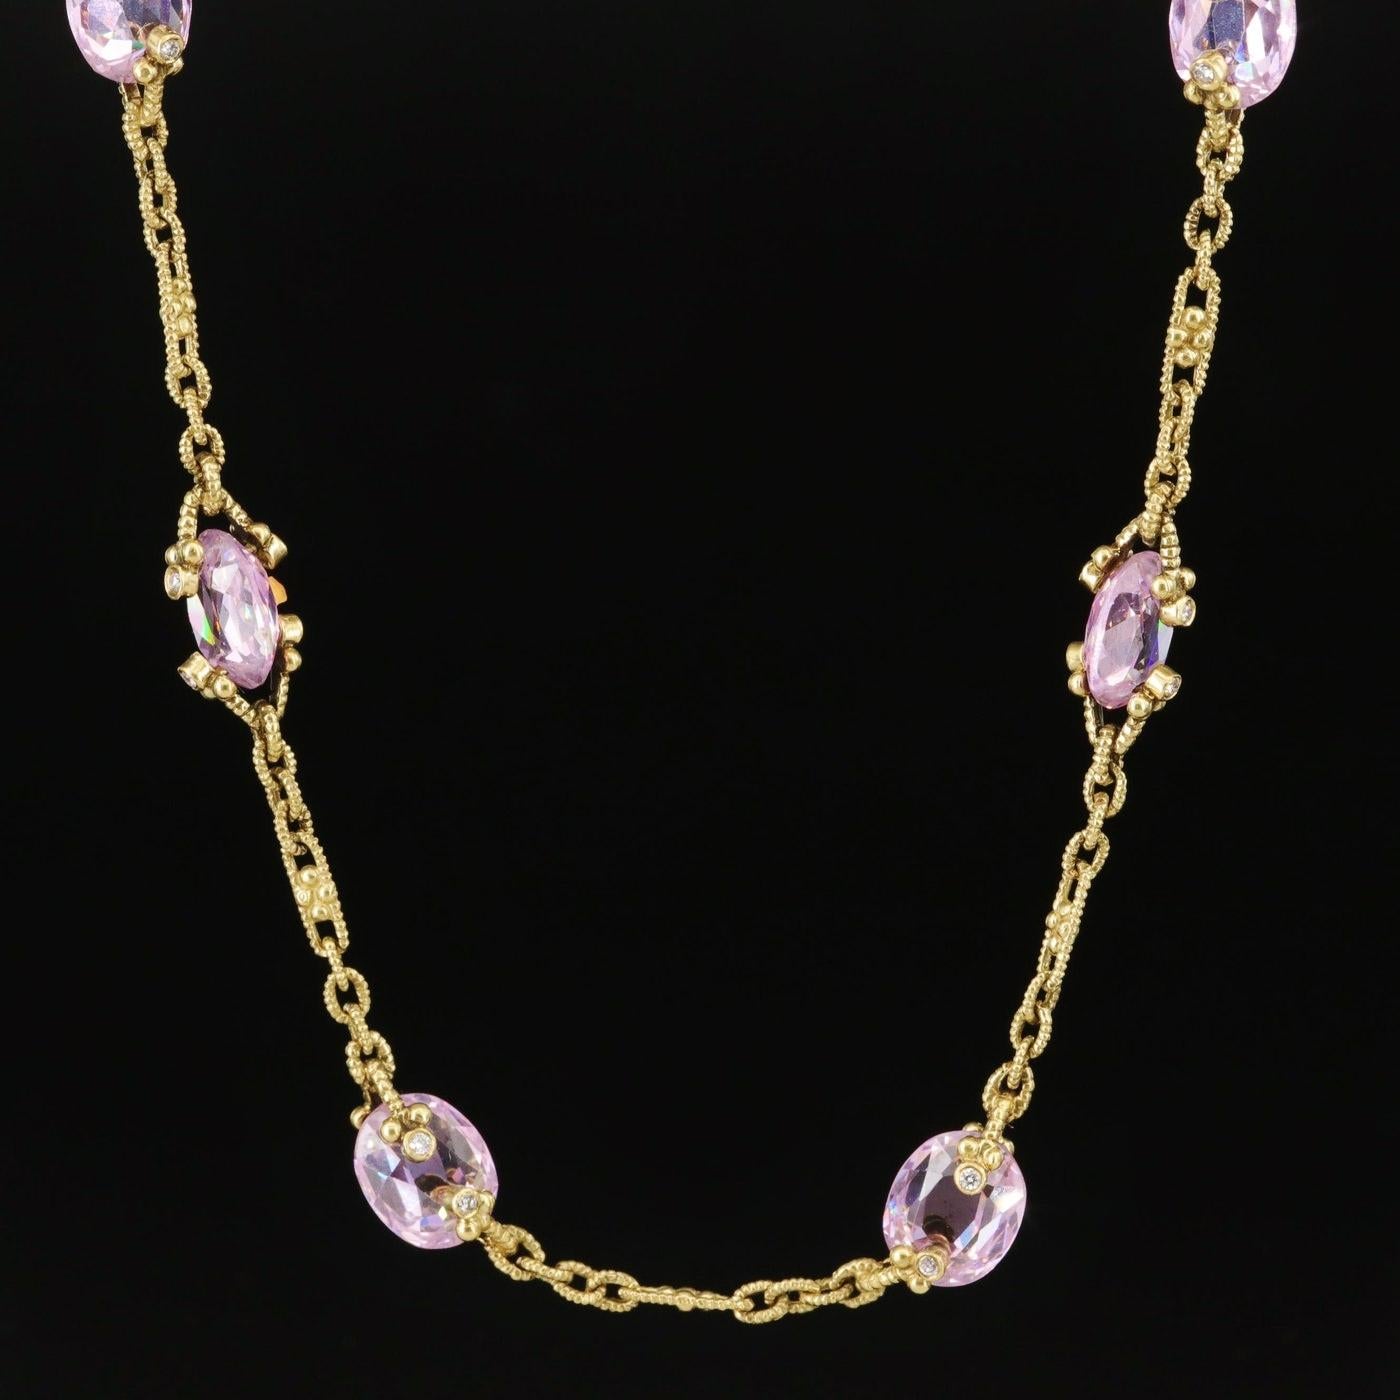 Designer Judith Ripka Necklace (stamped with the designer hallmarks)

NEW with tags, Tag Price $8500

18K solid Yellow gold

Very heavy and well made, 23.8 grams in weight 

27.5 CWT Diamond (0.5 CT) and Pink Sapphire (27 CT)
              - Diamond